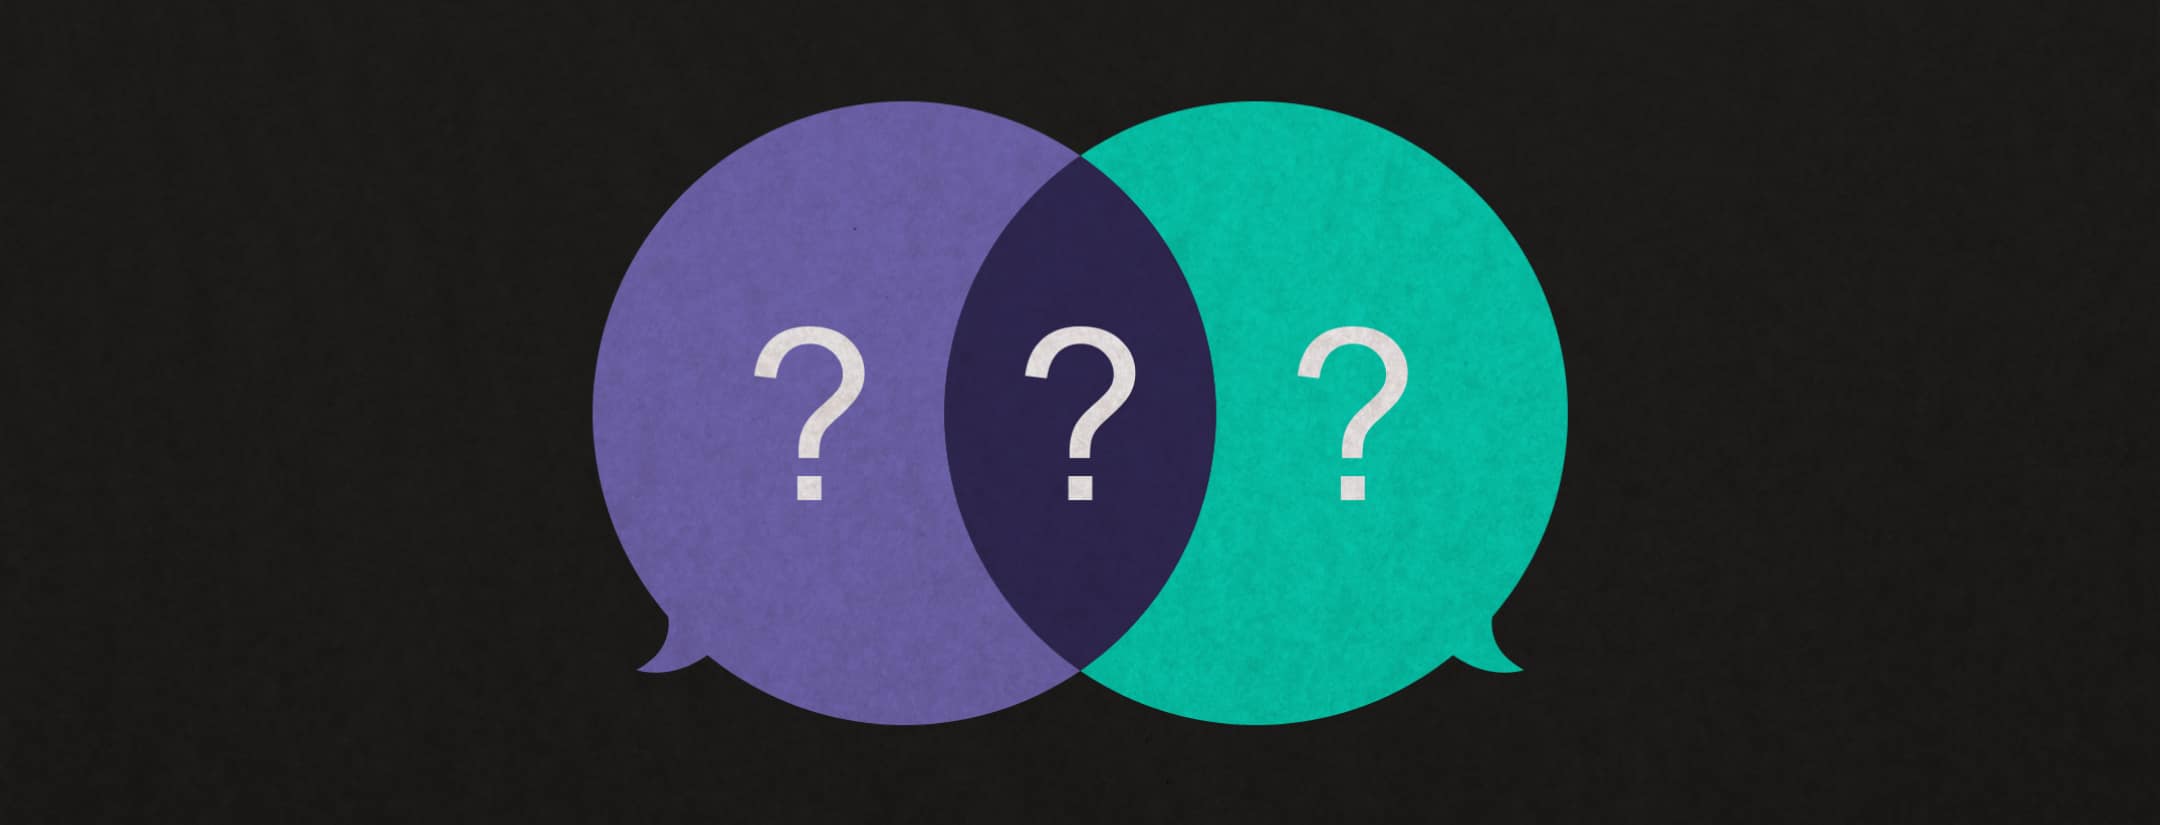 Deliver a better customer experience and products by asking better research questions